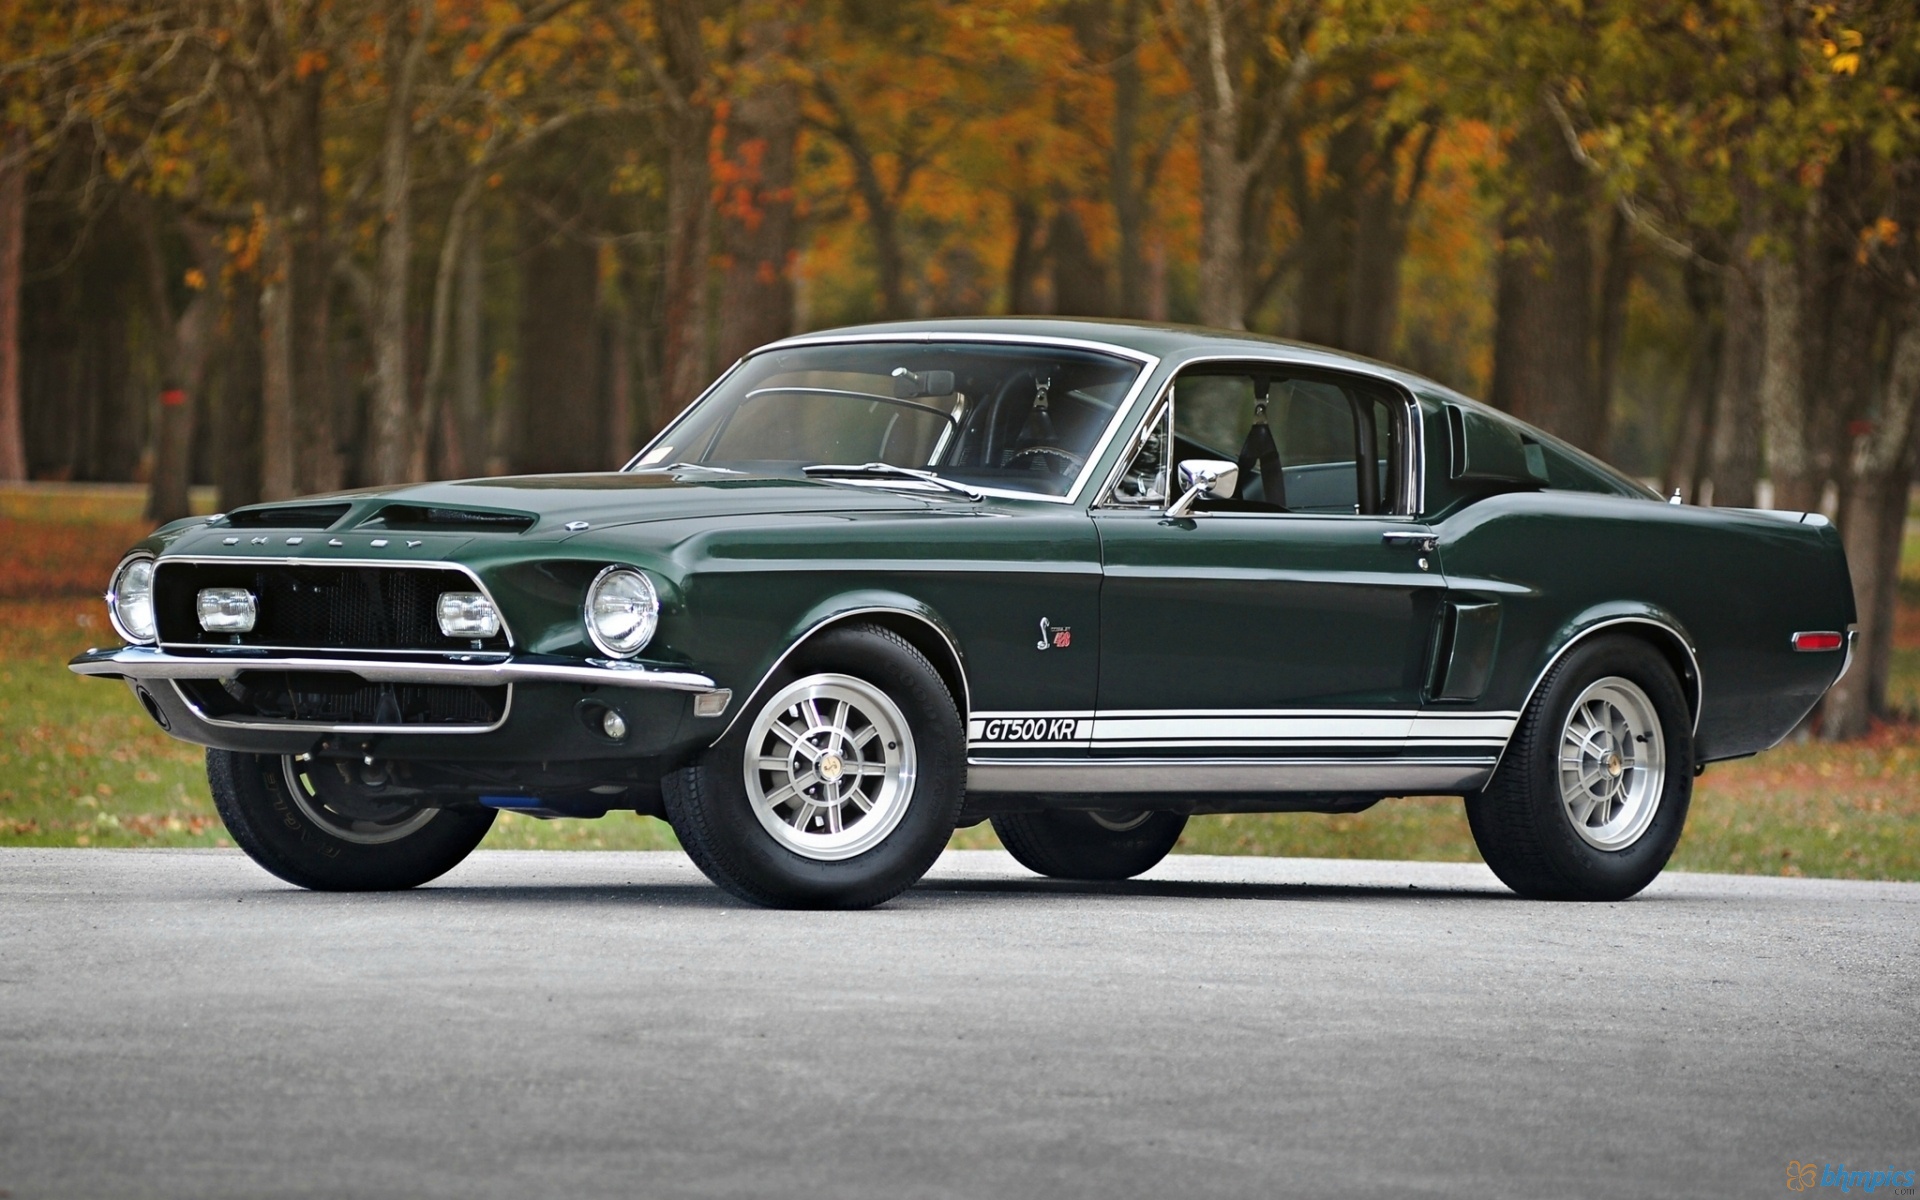 1968 Ford Mustang Shelby GT 500 Wallpapers - 1920x1200 - 644763